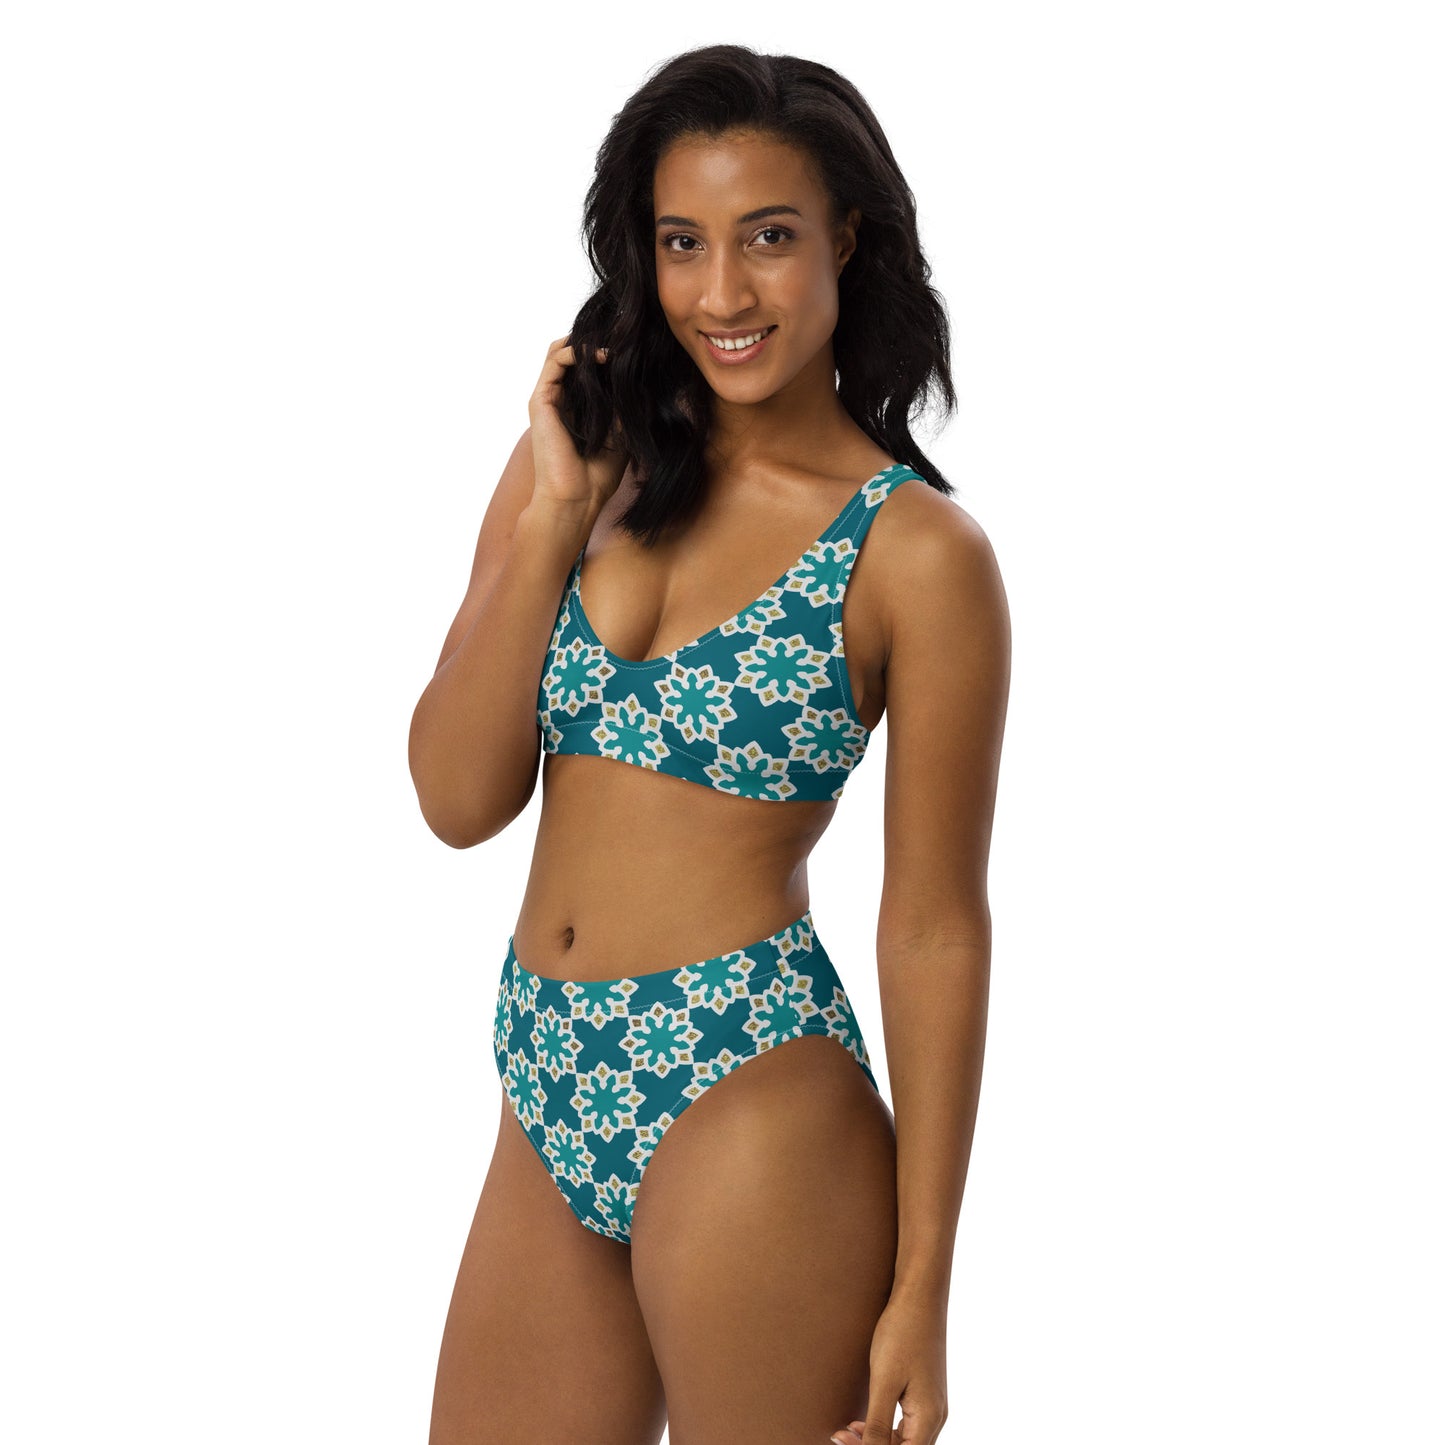 Recycled rPET high-waisted bikini 🍃 Arabesque Flowers in Aqua and Gold